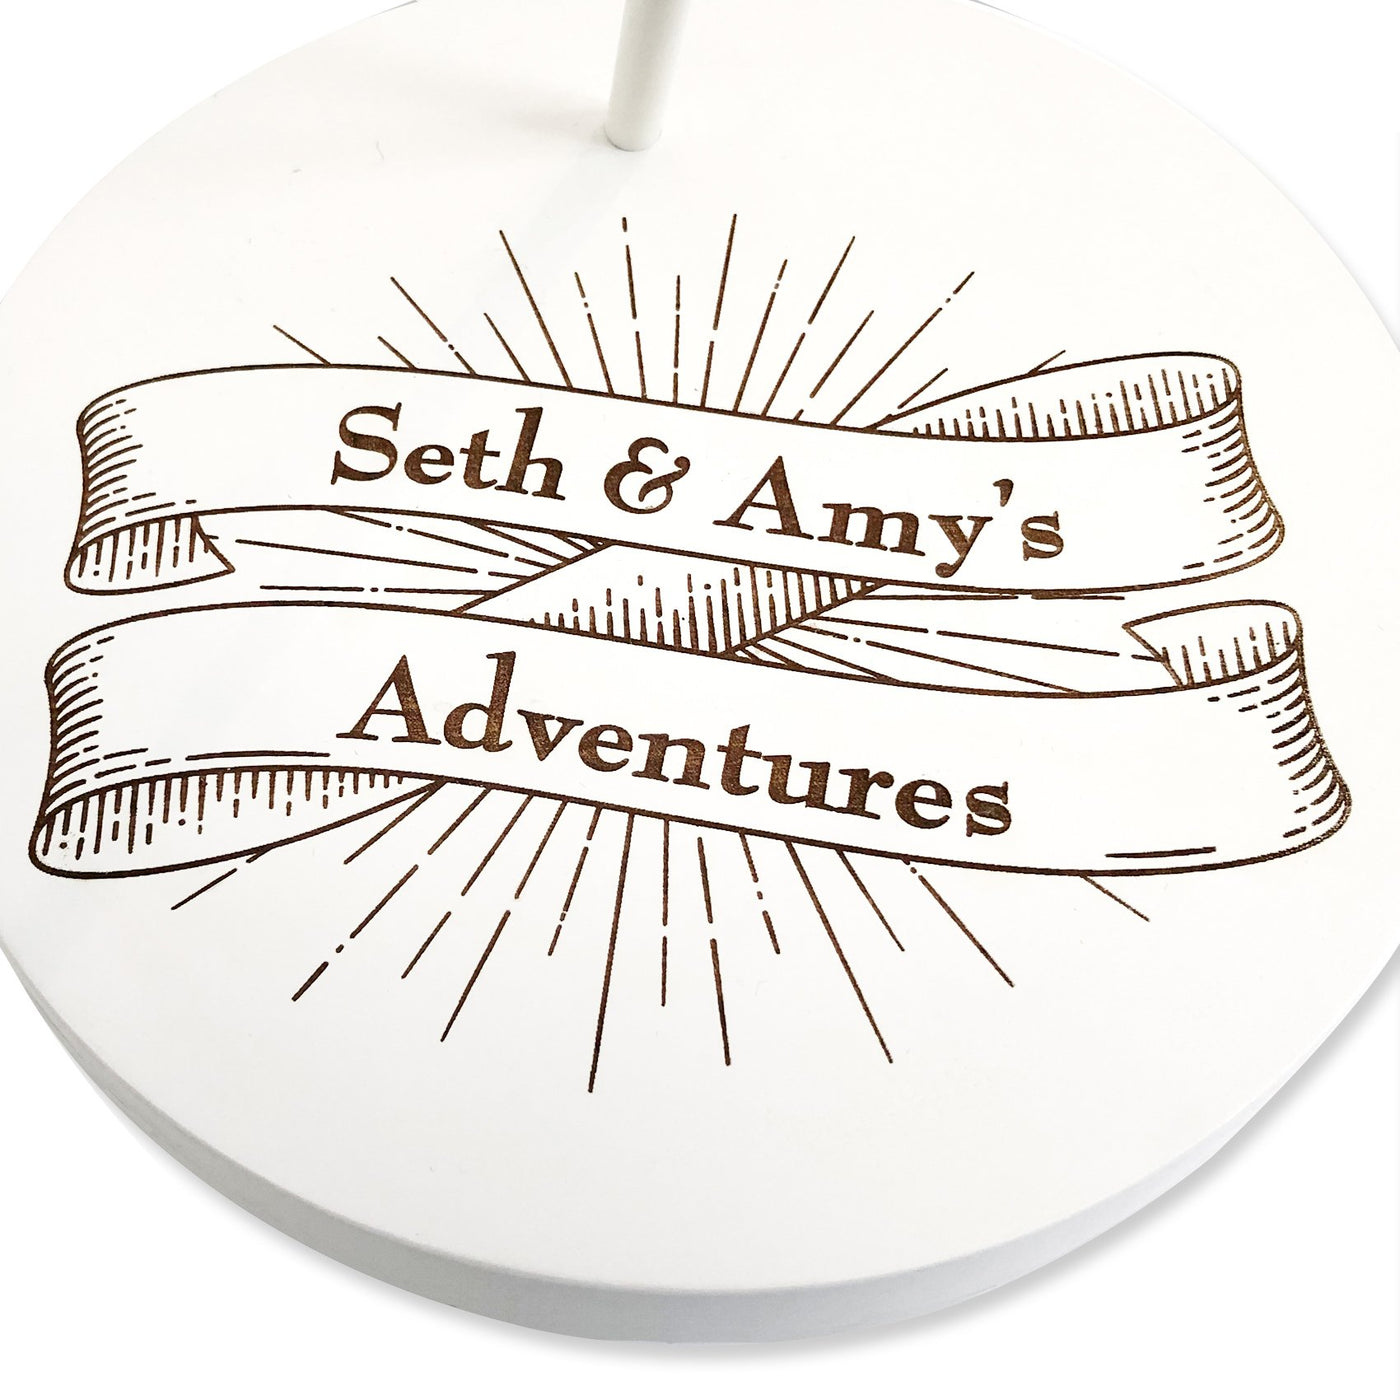 Custom Engraved Adventures Banner Push Pin Globe by Wendy Gold